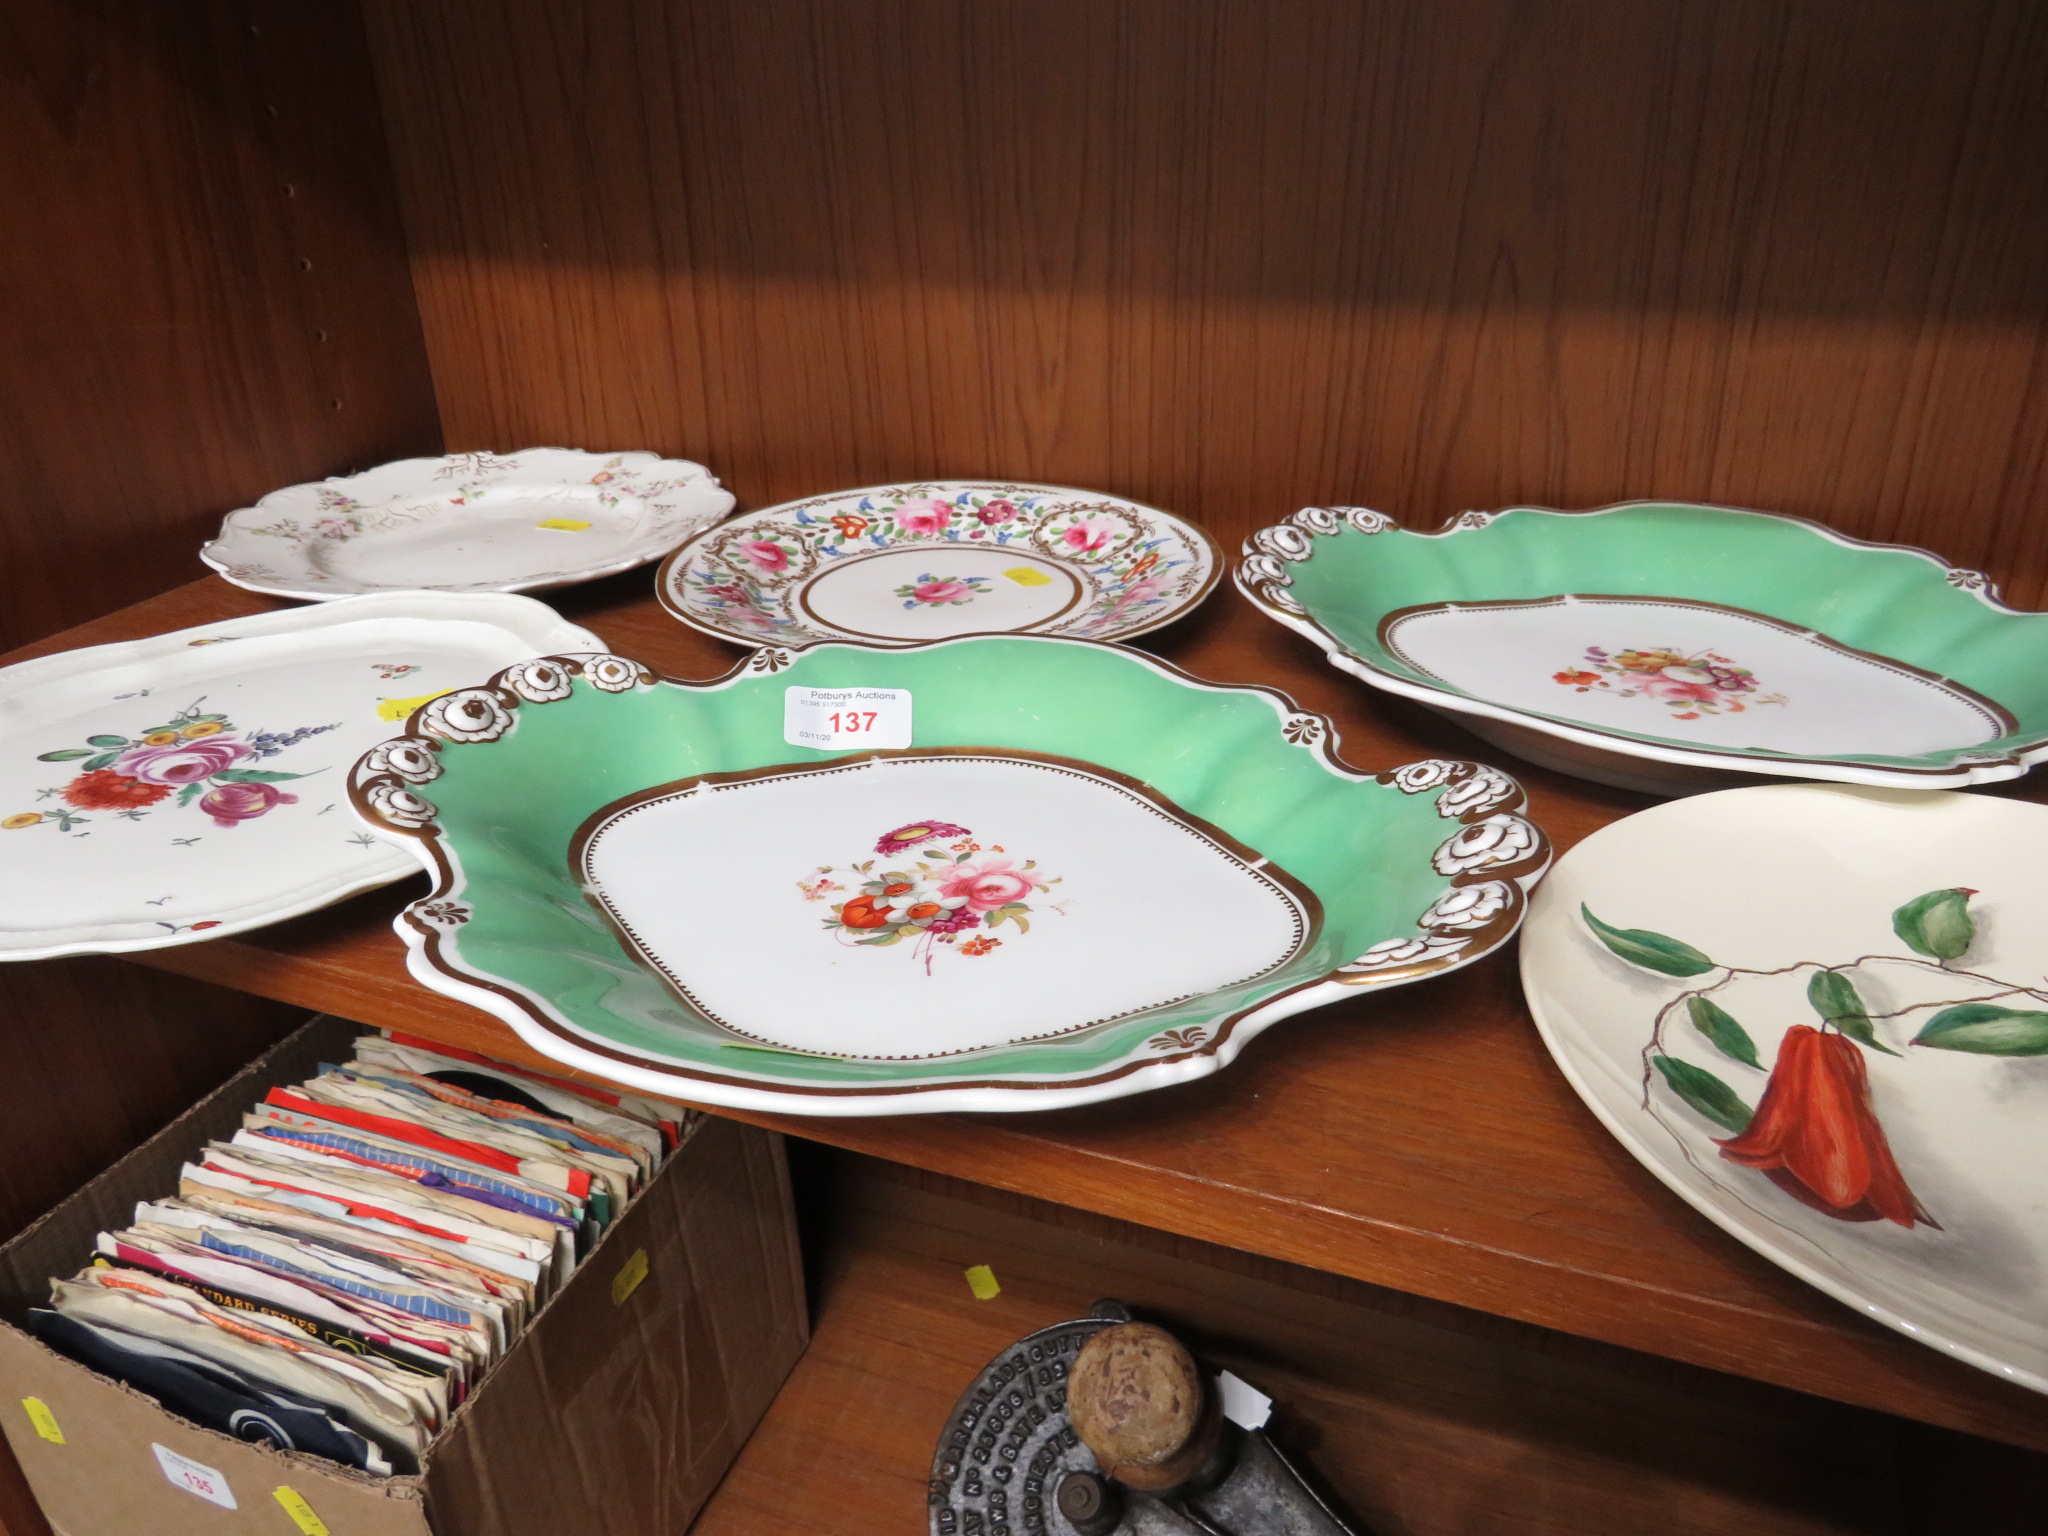 SIX VAROUS CHINA AND PORCELAIN PLATES , HAND-PAINTED, INCLUDING COALPORT